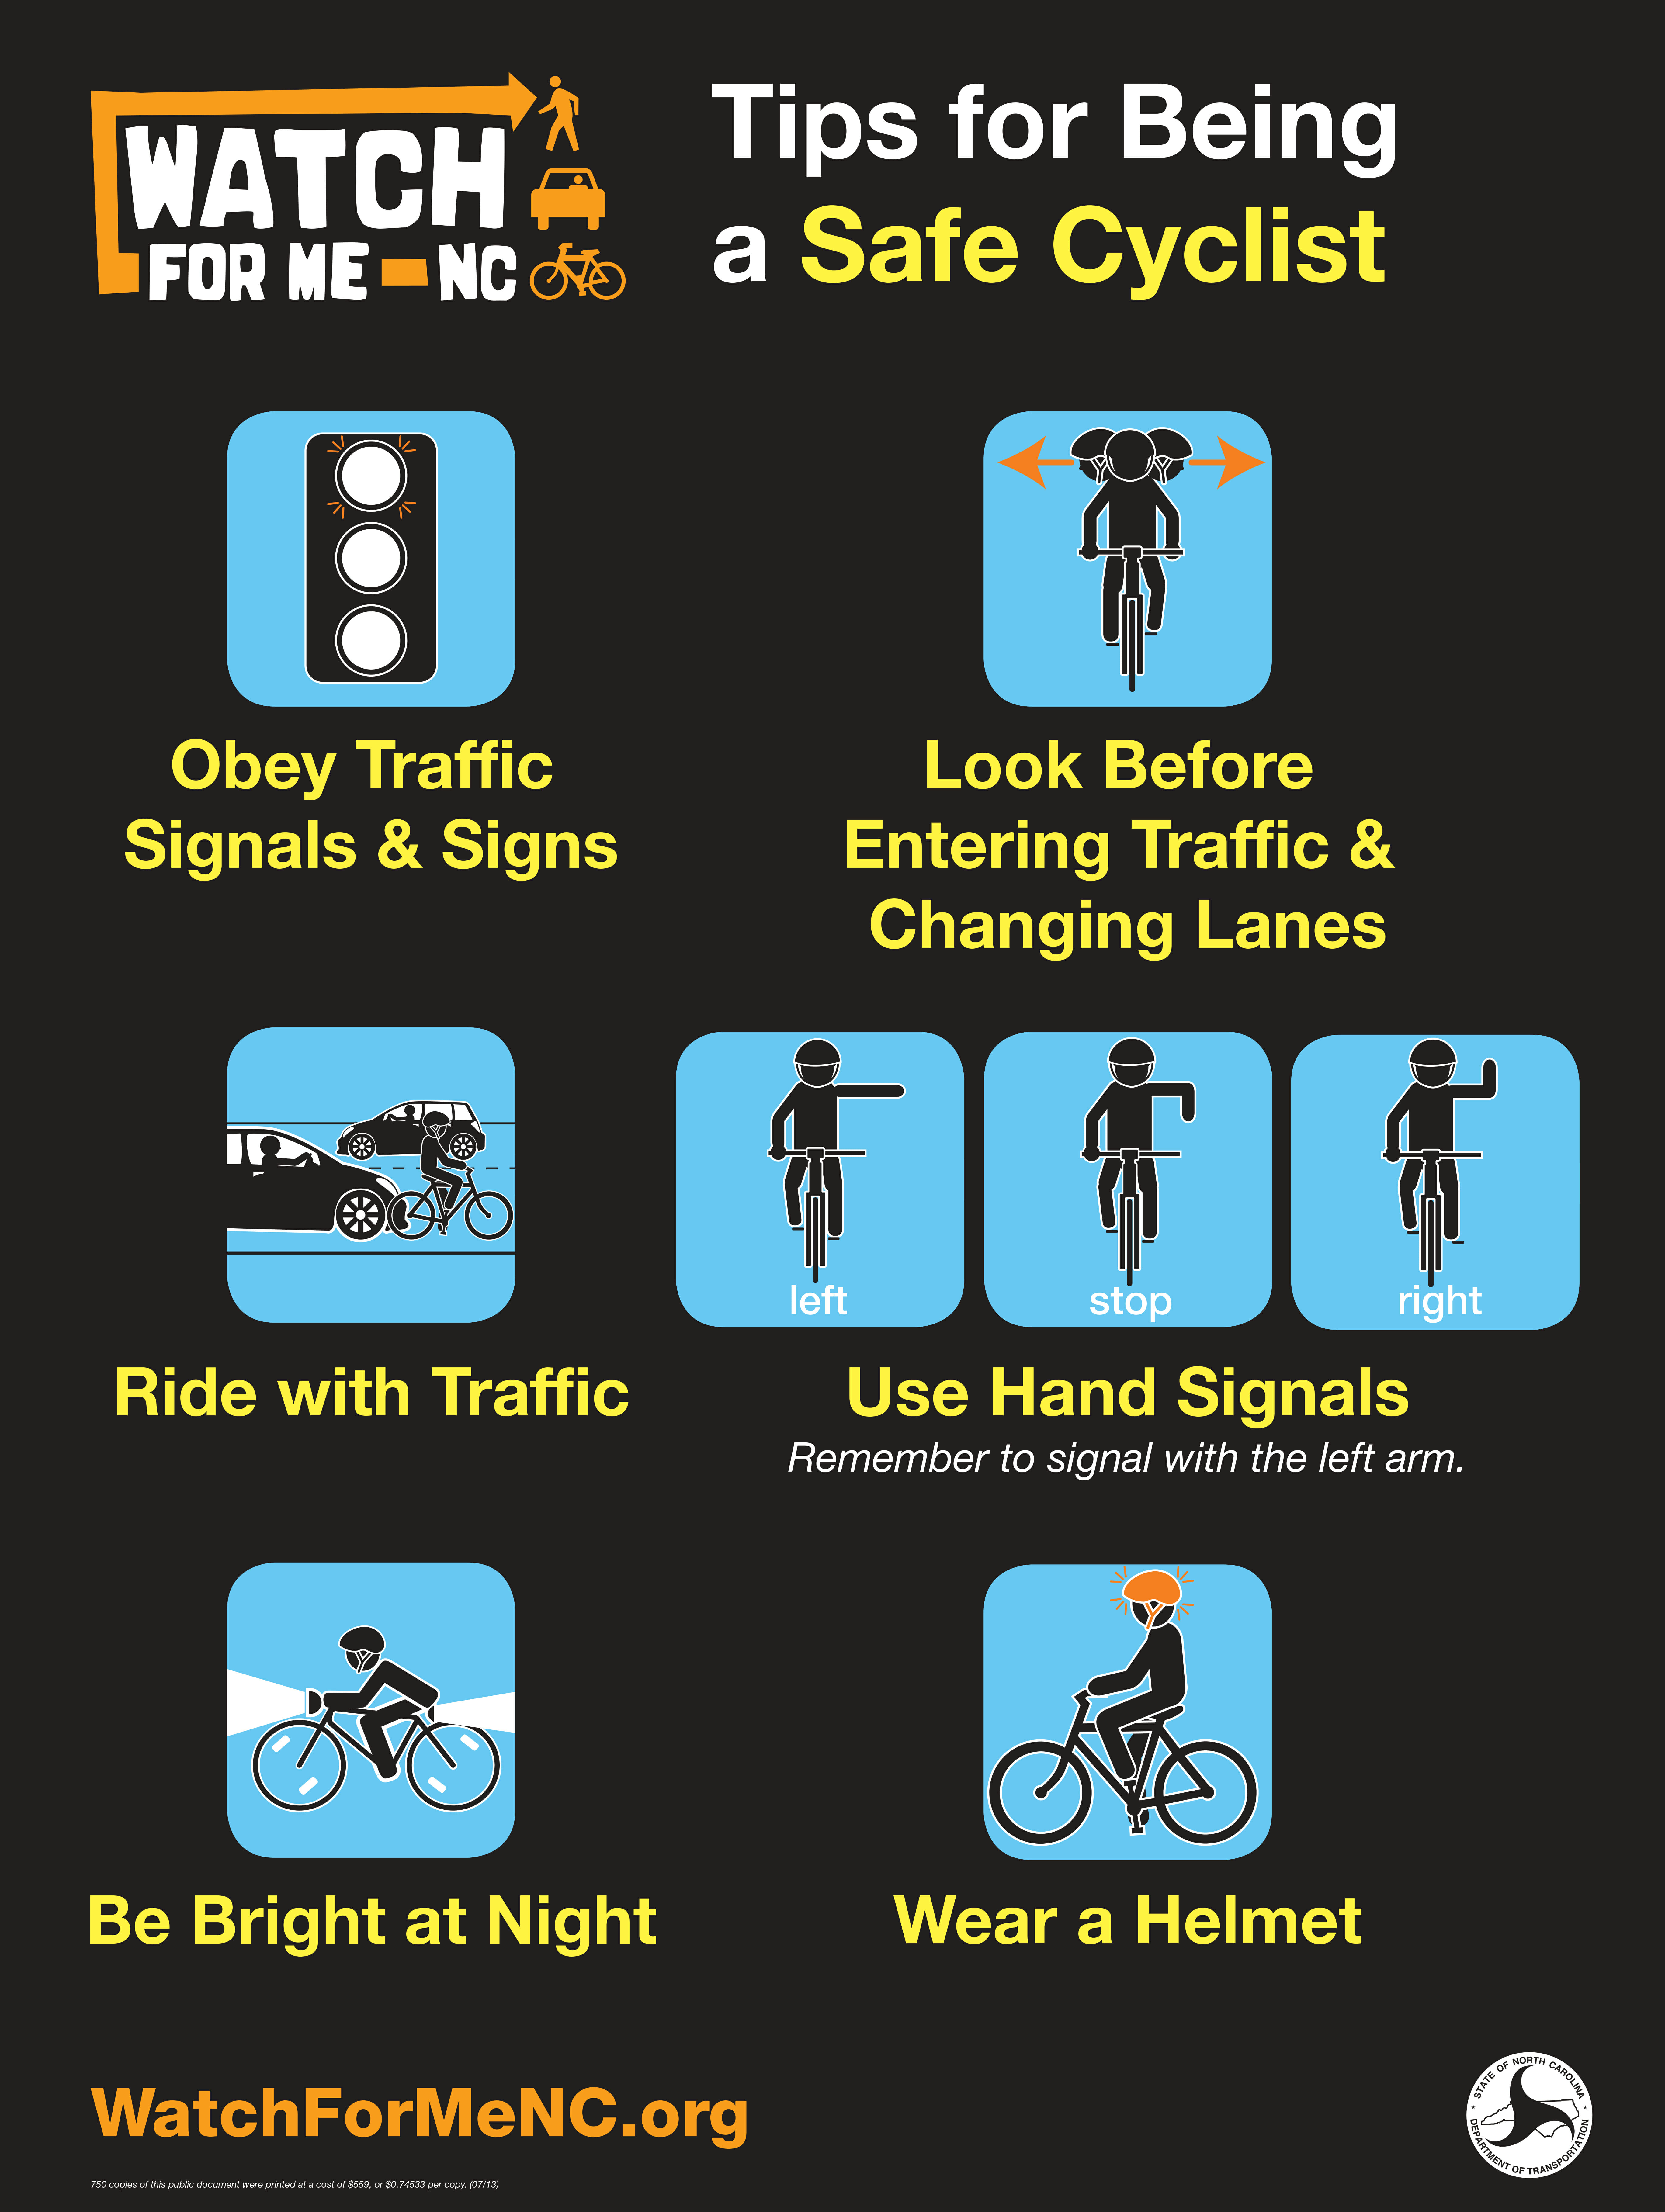 Watch for me NC - Tips for being a safe cyclist image